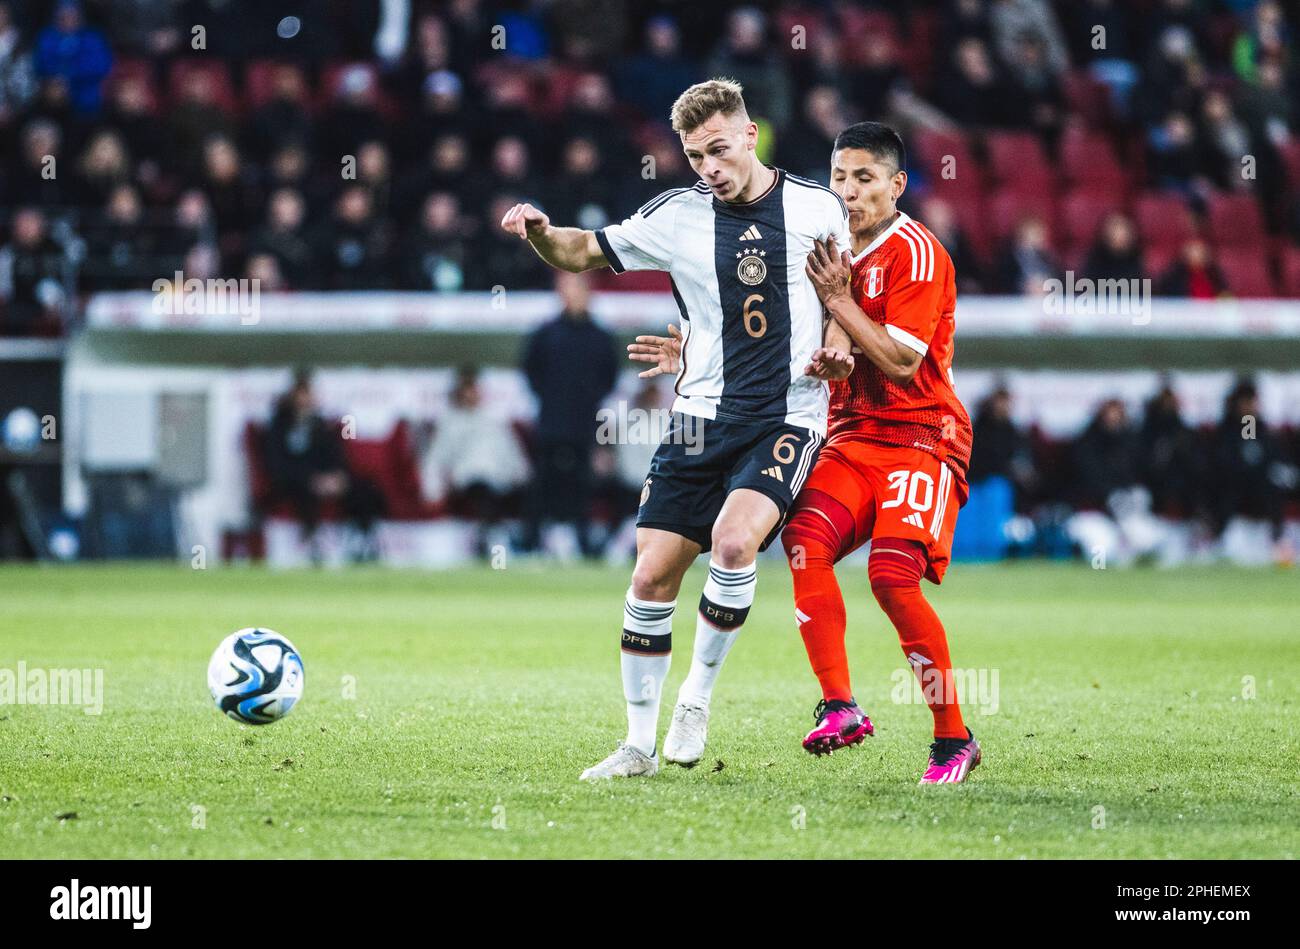 Mainz, Mewa-Arena, 25.03.23: Joshua Kimmich of Germany (L) challenges Raul Ruidiaz of Peru during the friendly match between Germany and Peru. Stock Photo